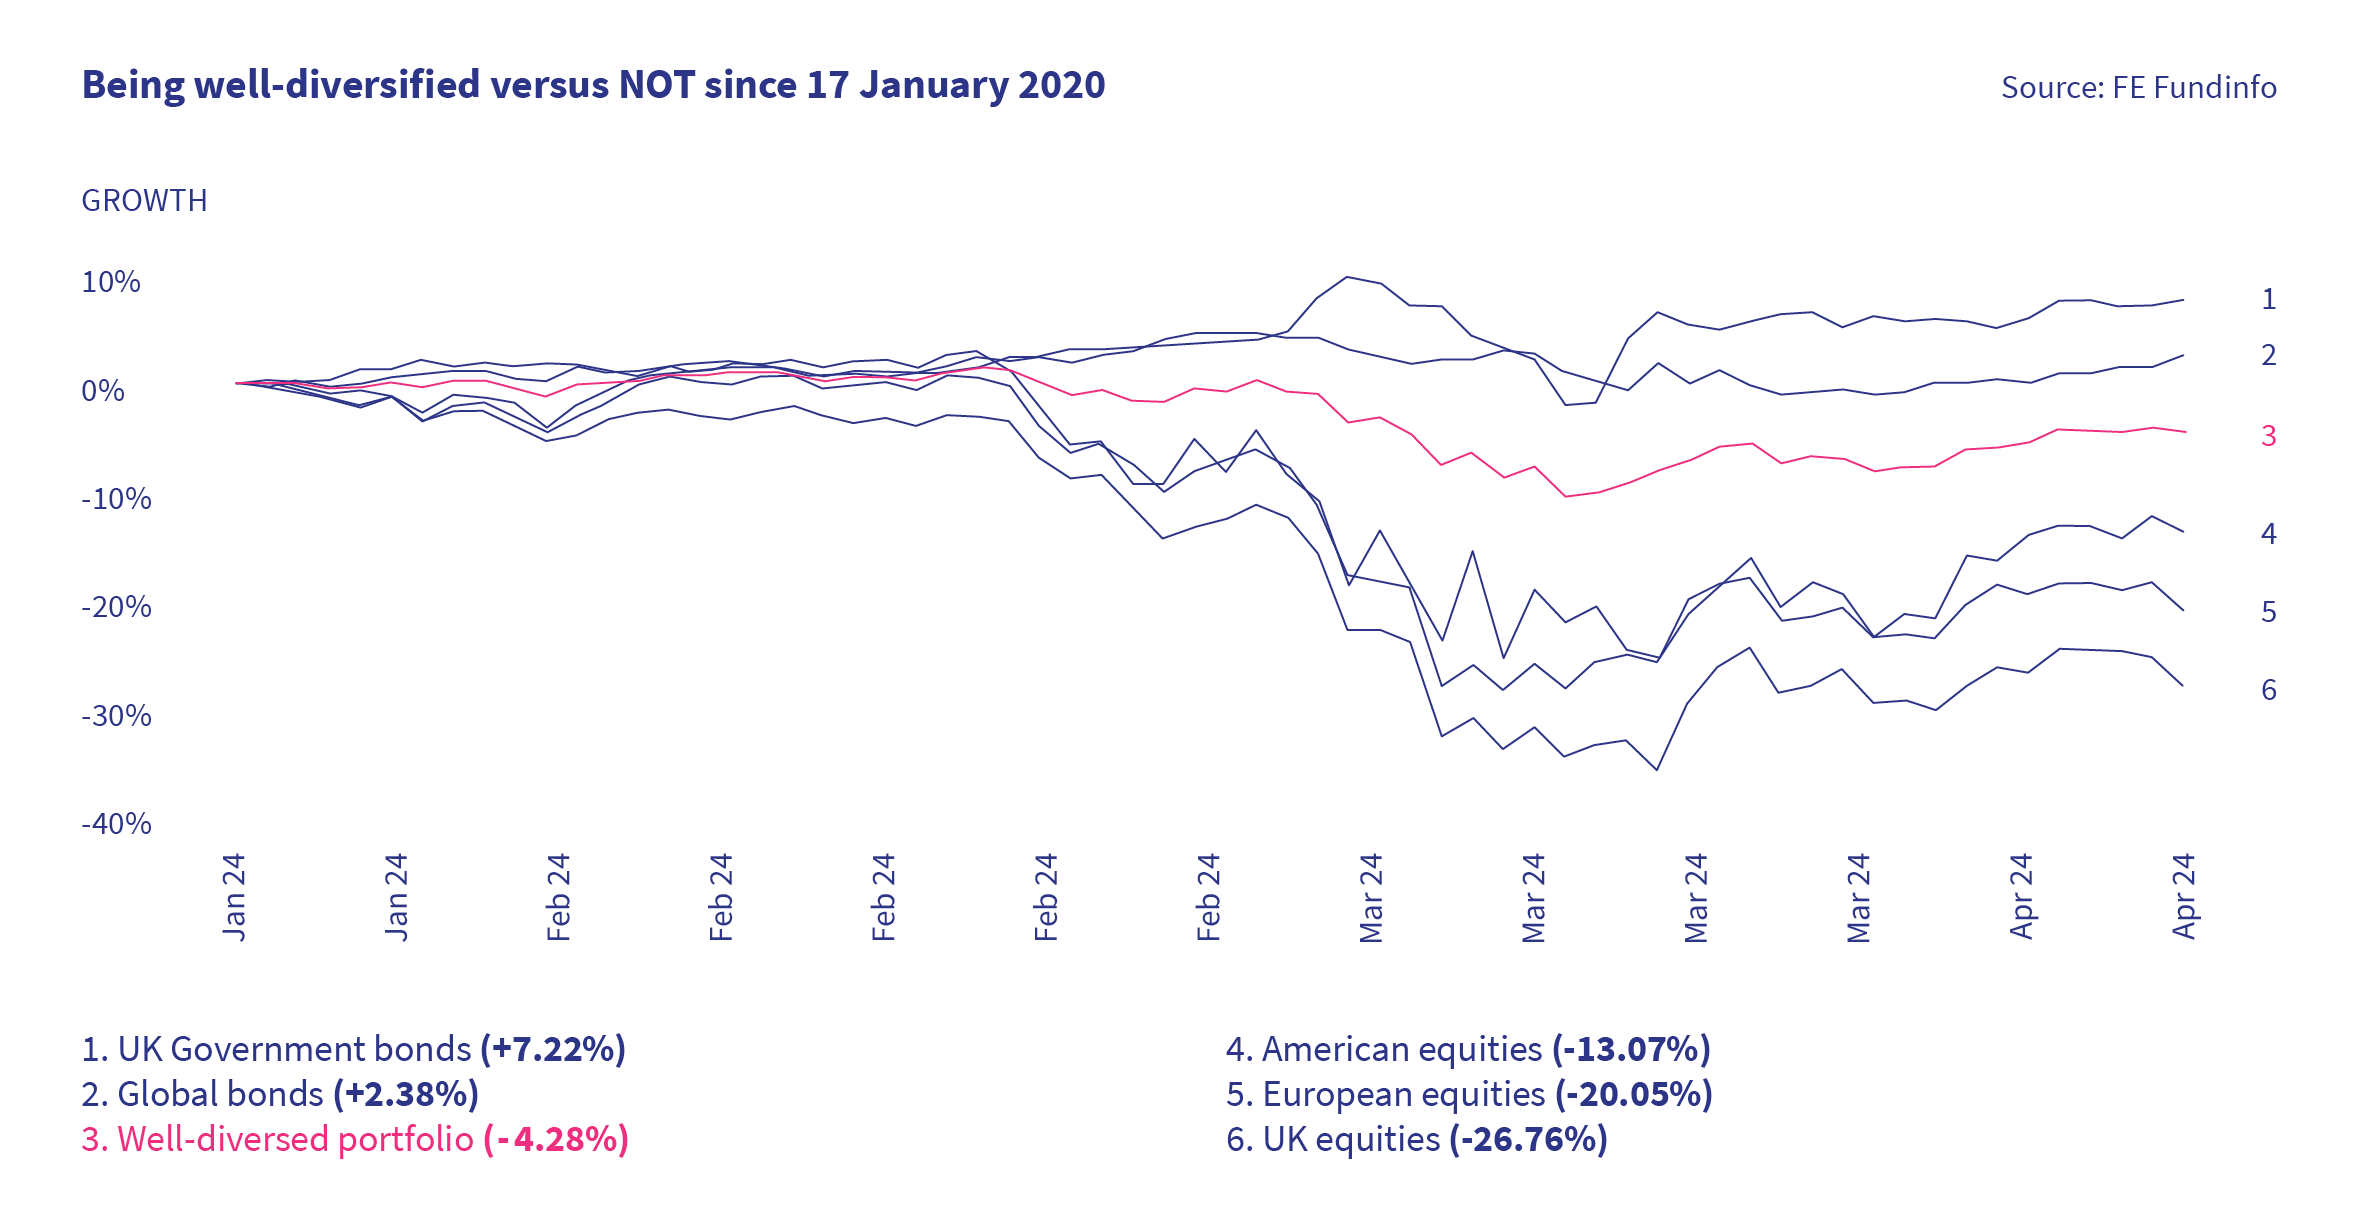 Being well-diversified versus NOT since 17 January 2020